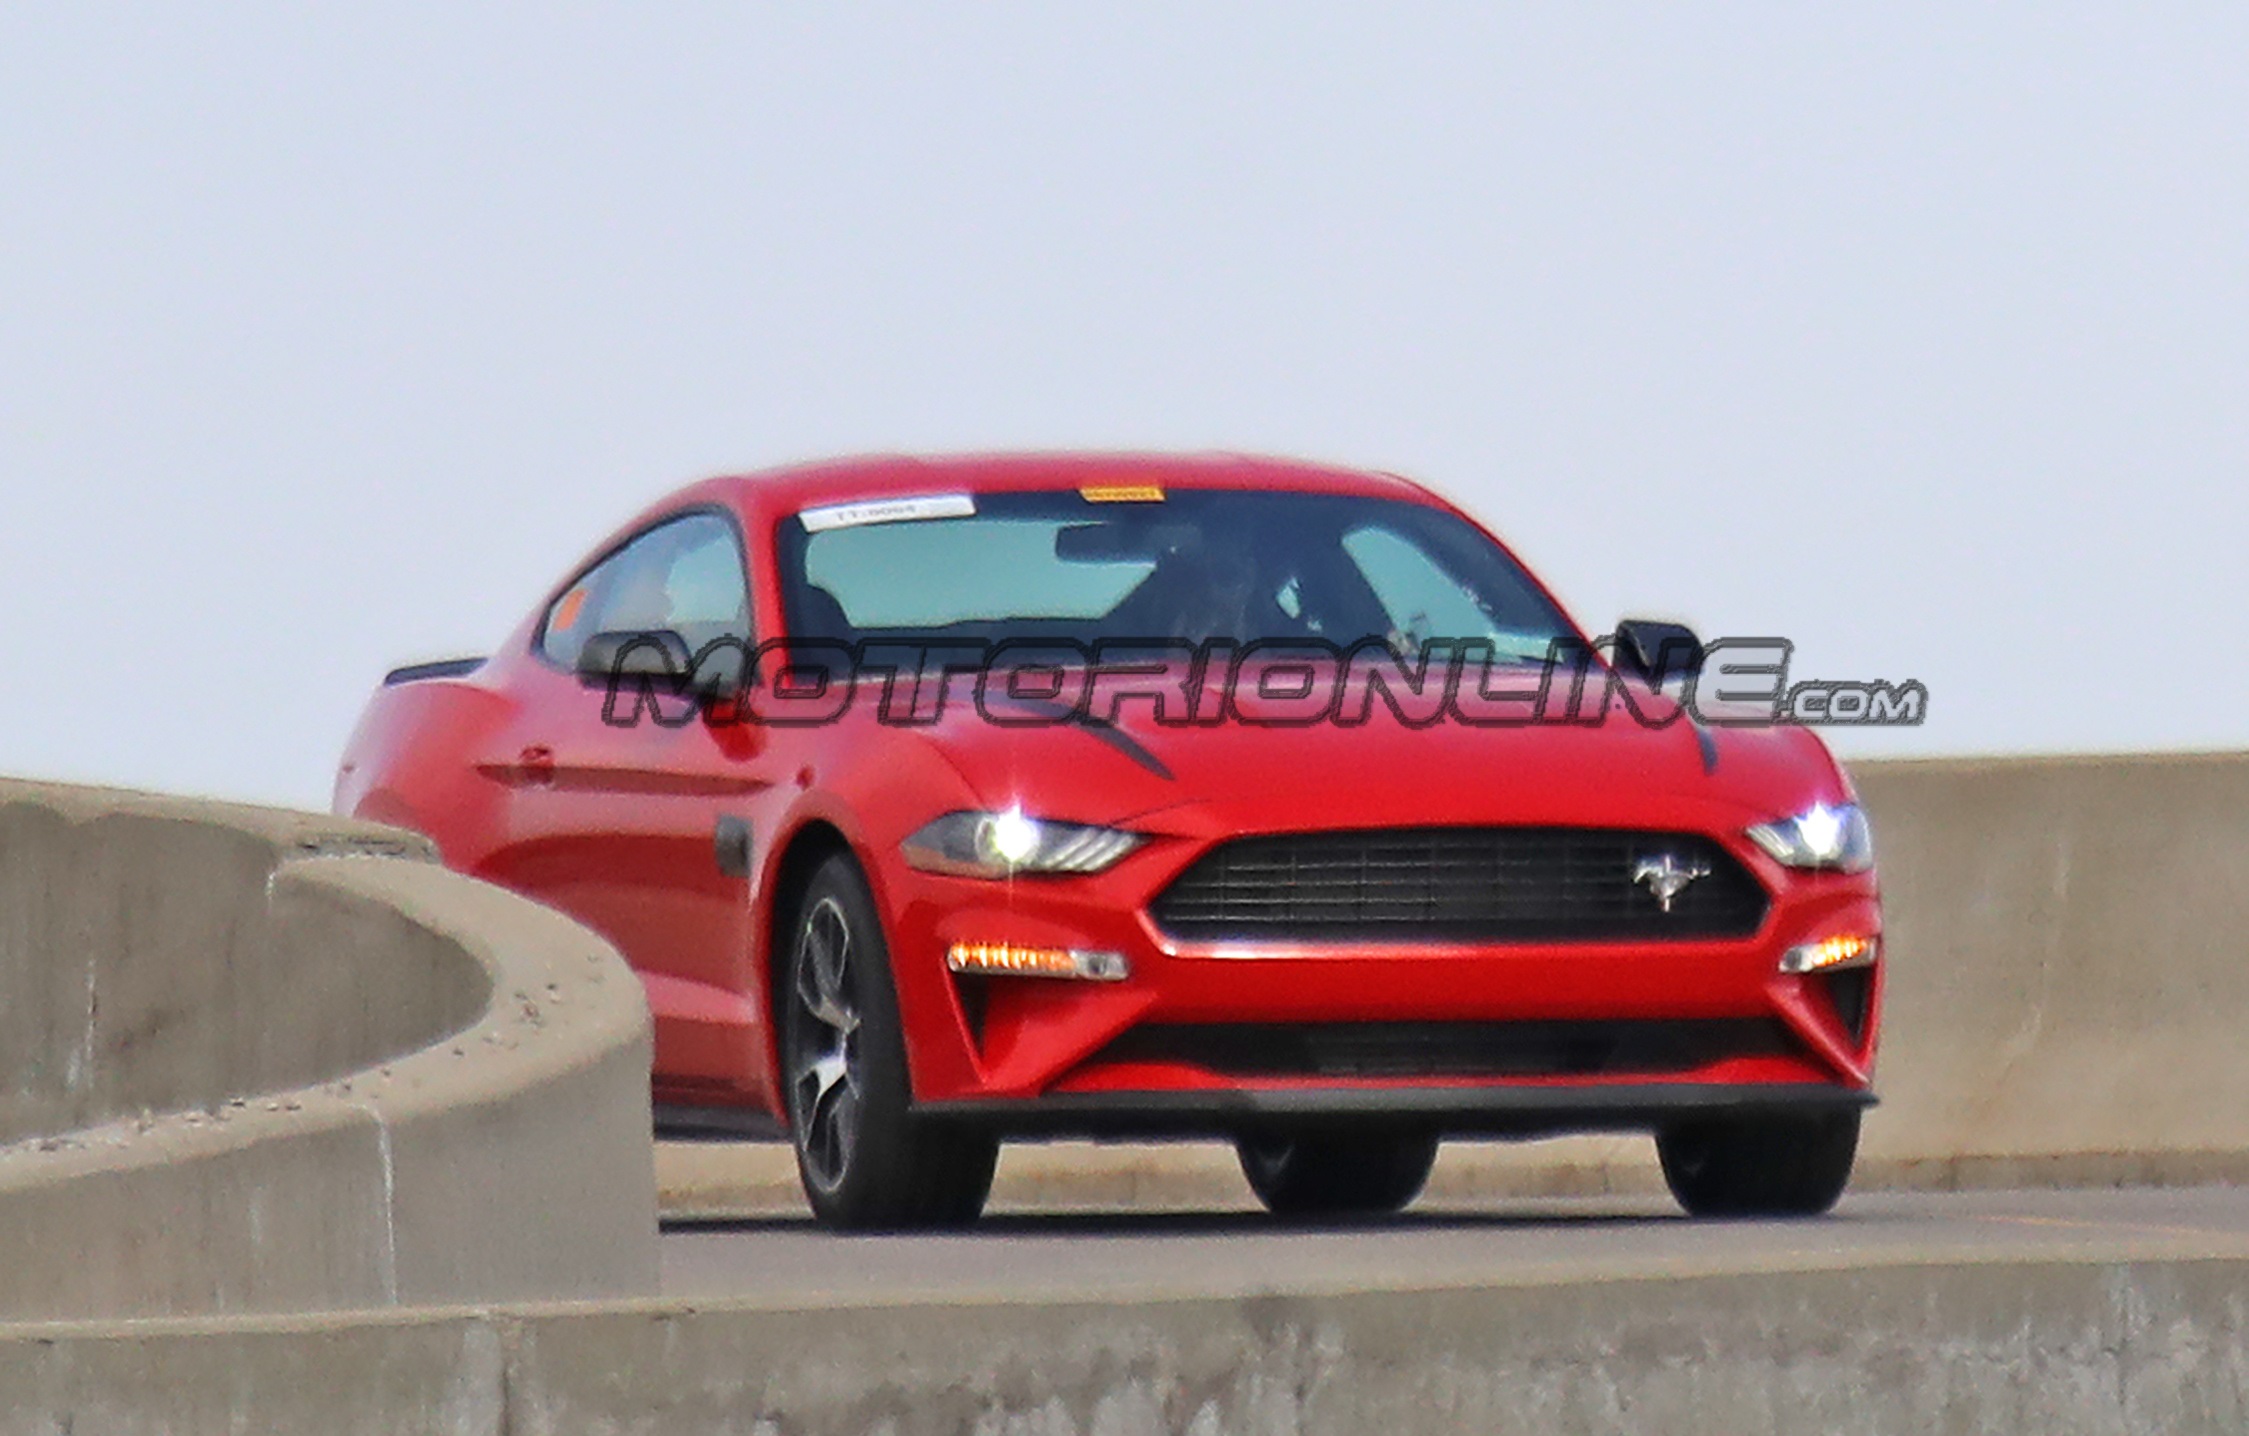 Ford Mustang SVO - Foto spia 09-04-2019